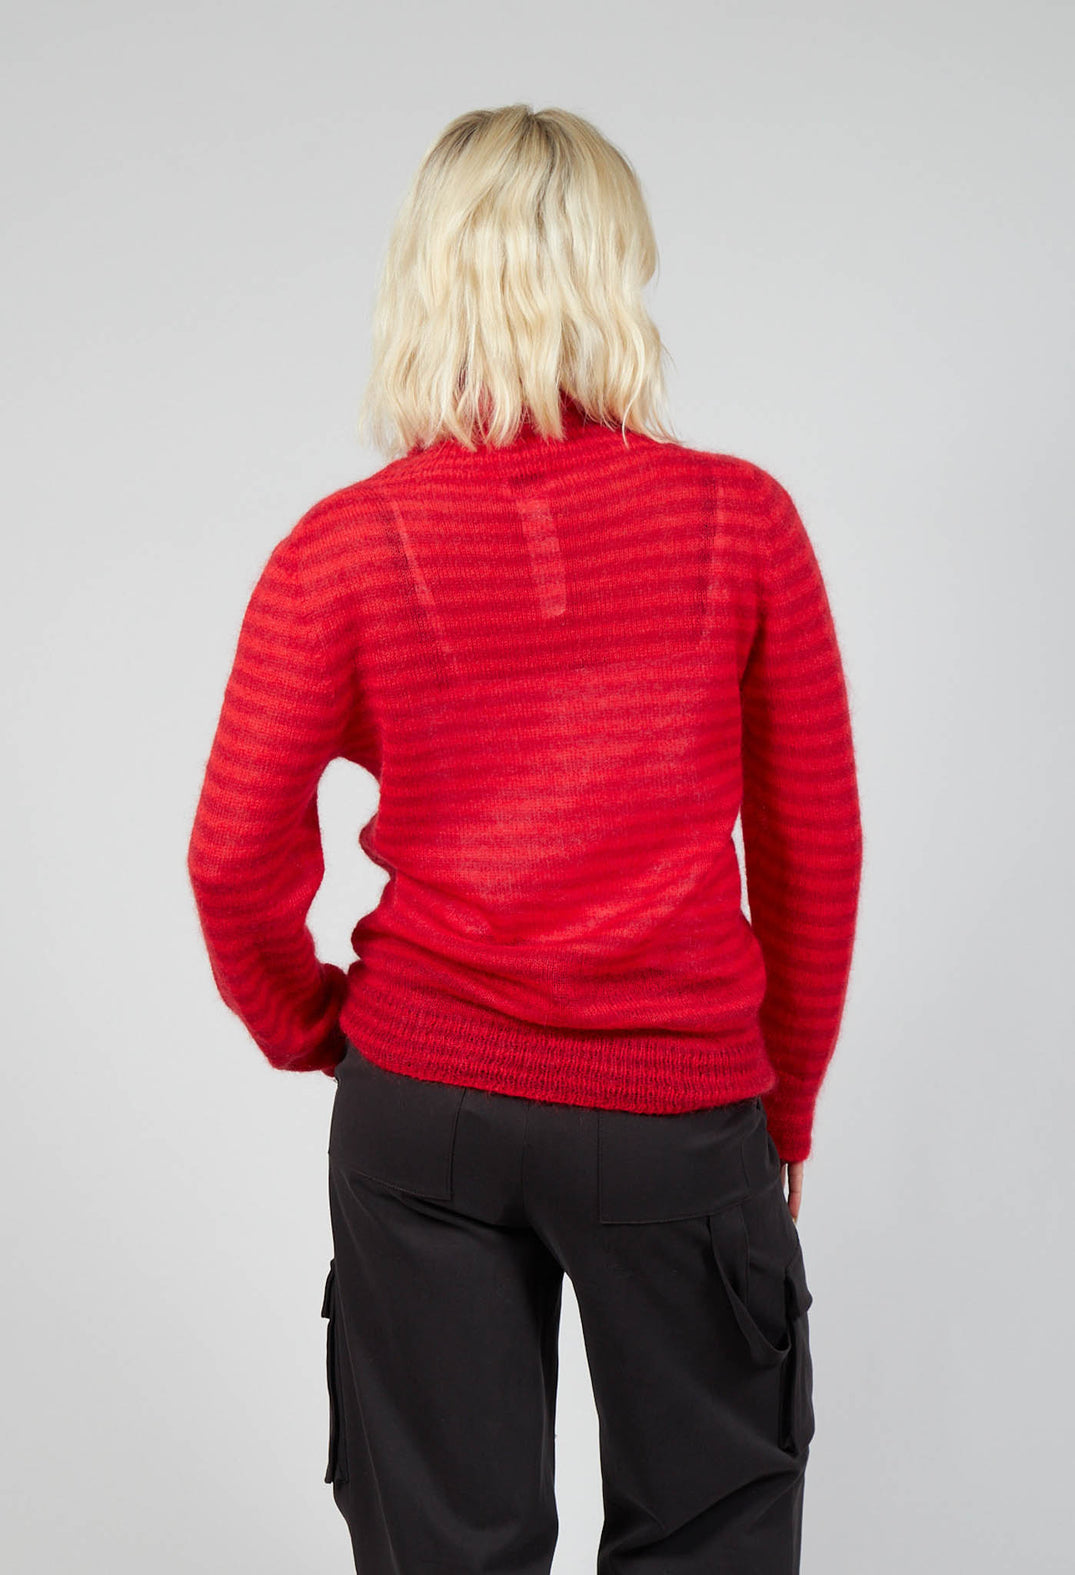 Striped Turtleneck Sweater in Adrenaline Red